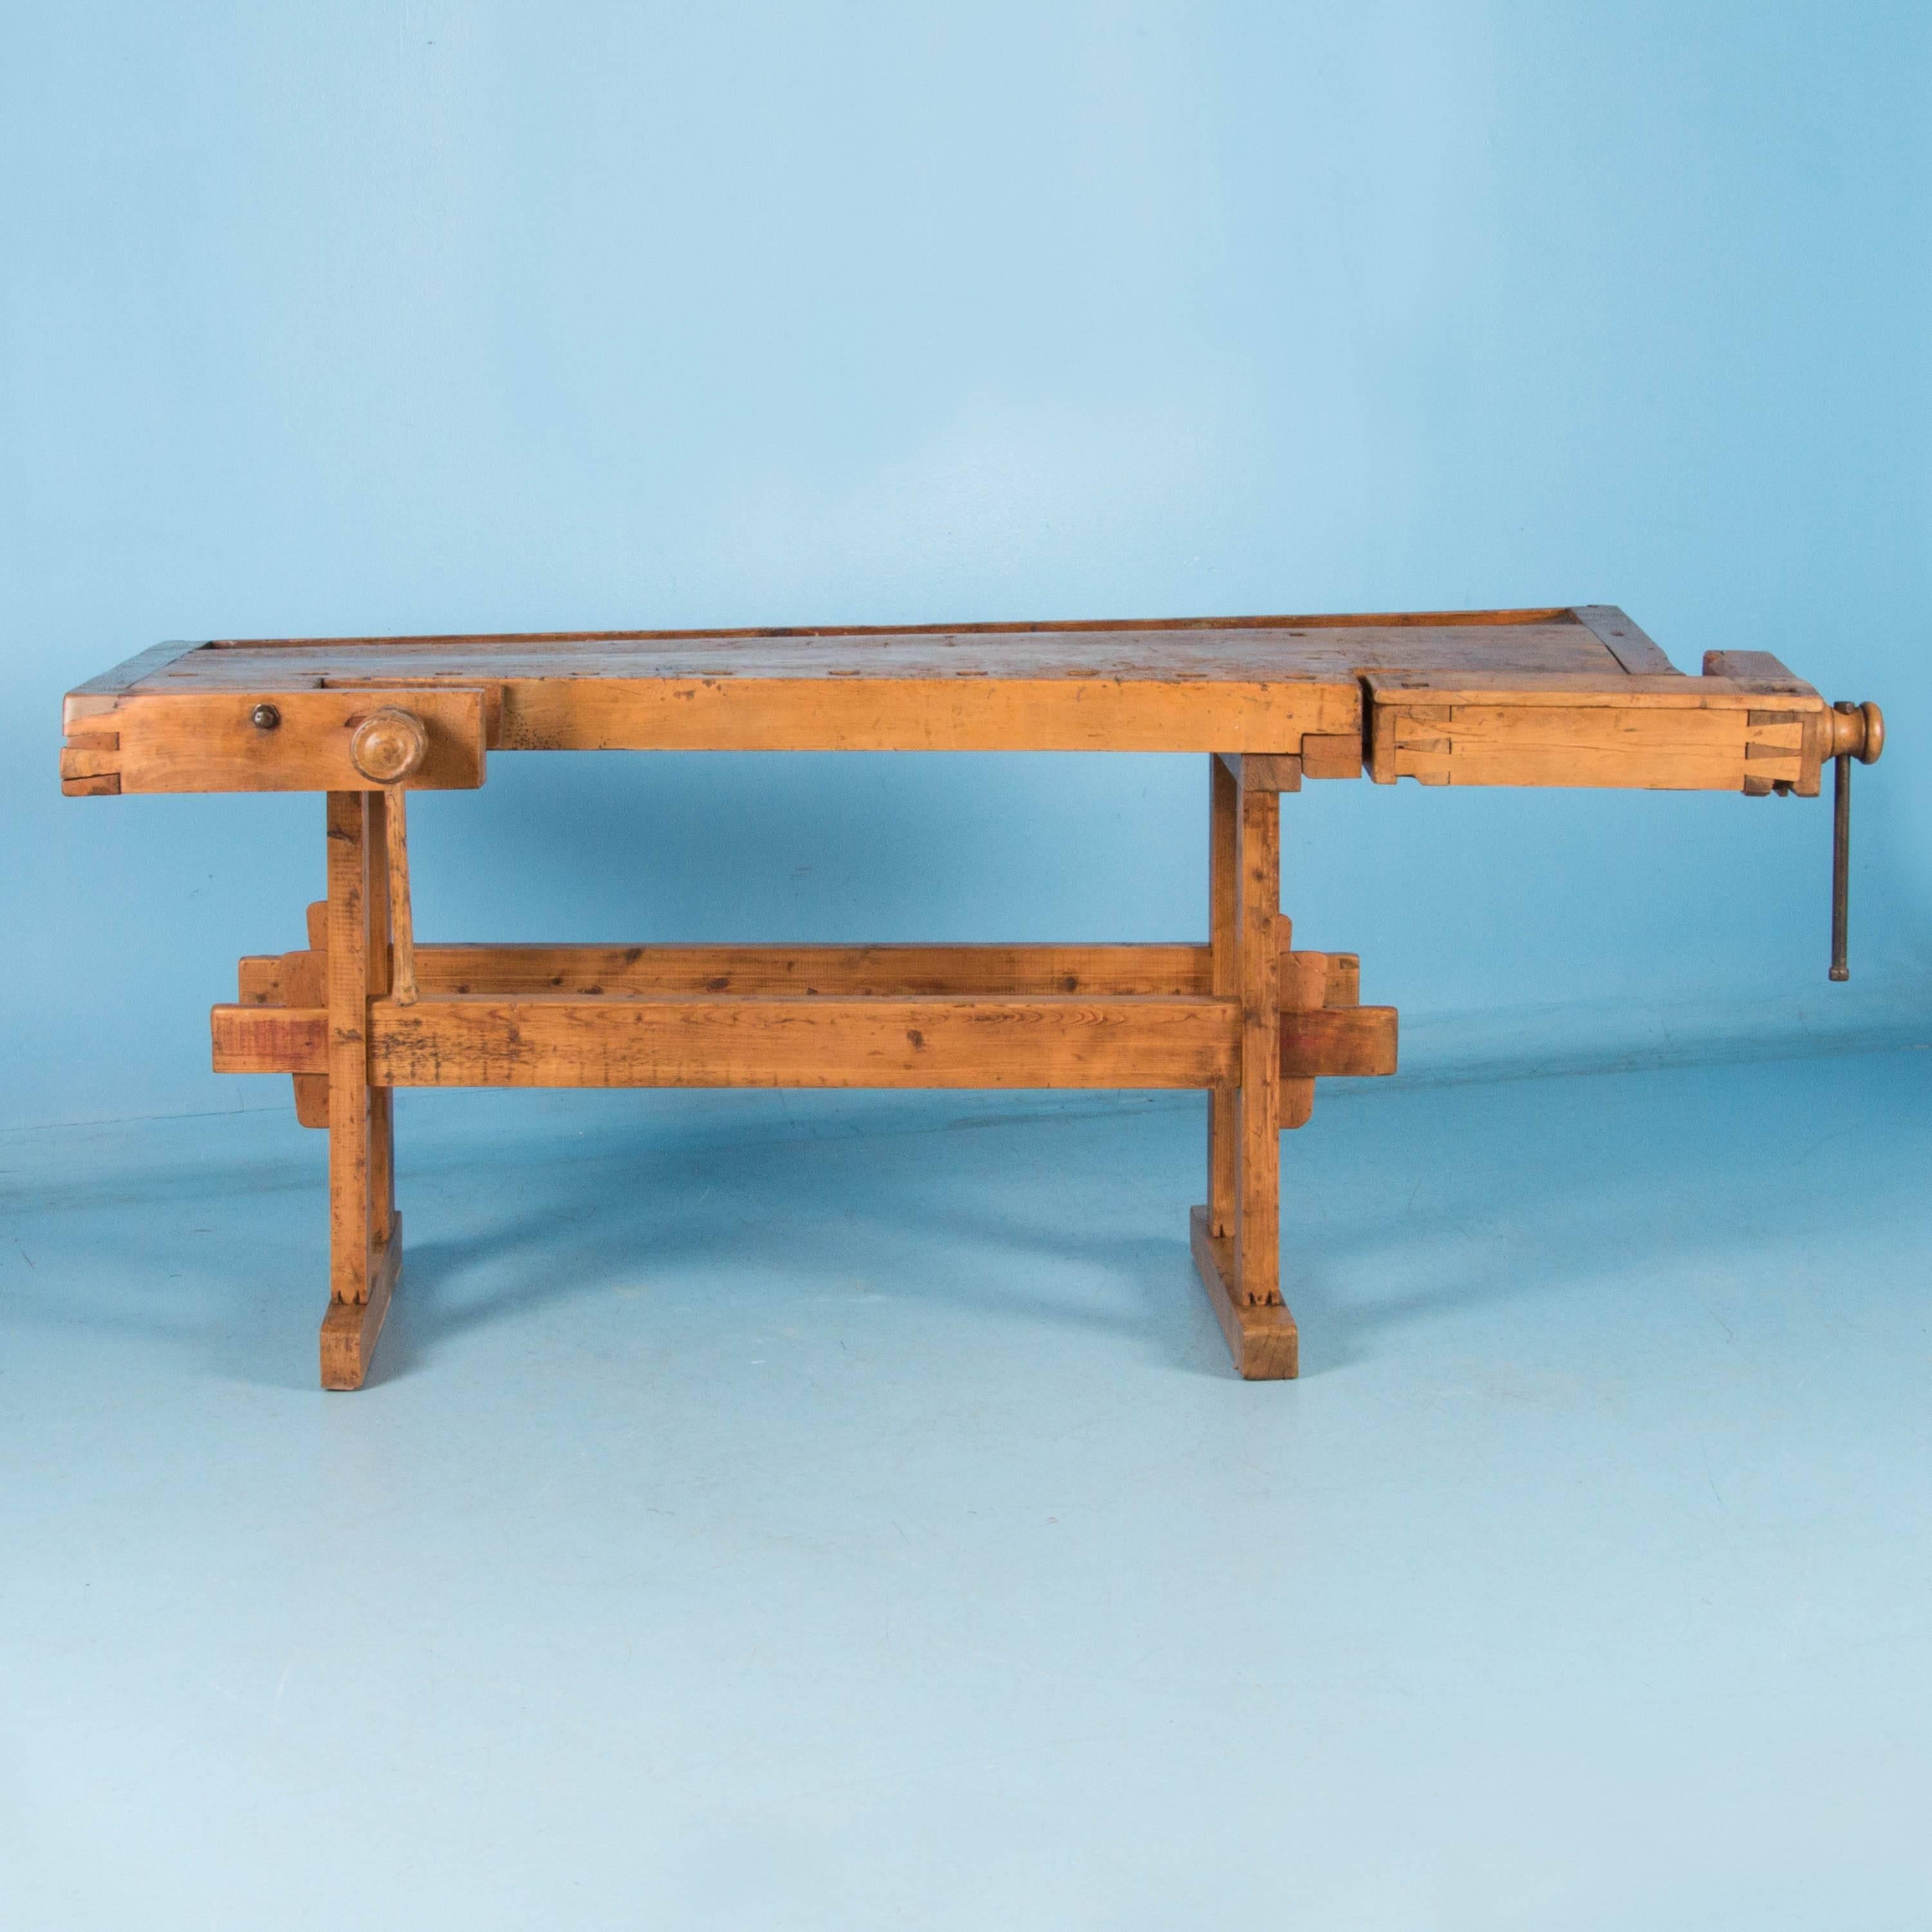 This circa 1900 antique workbench is made of a variety of hardwoods. It has a pair of working wood handled vices and a recessed tray where the carpenter would lay his tools and for catching debris. The bench top is flat but not level, with a twist